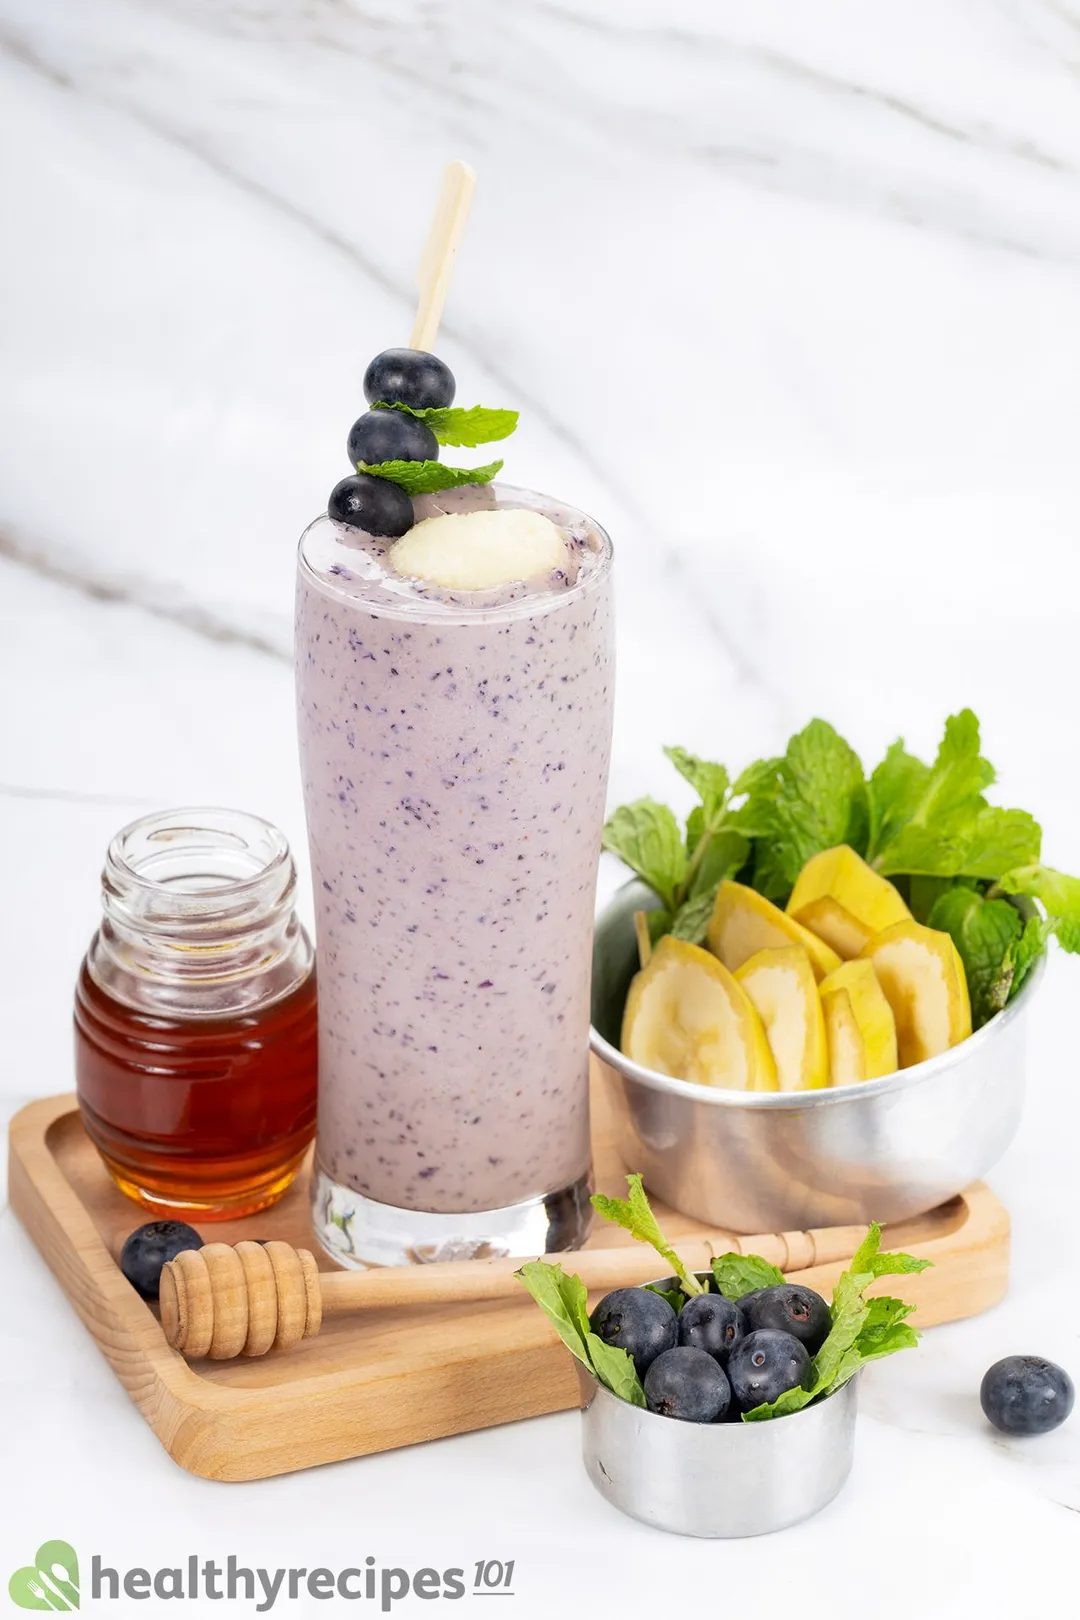 A tall glass of blueberry banana smoothie placed on a wooden board and surrounded by small bowls of bananas, blueberries, and mint leaves, and a small jar of honey.